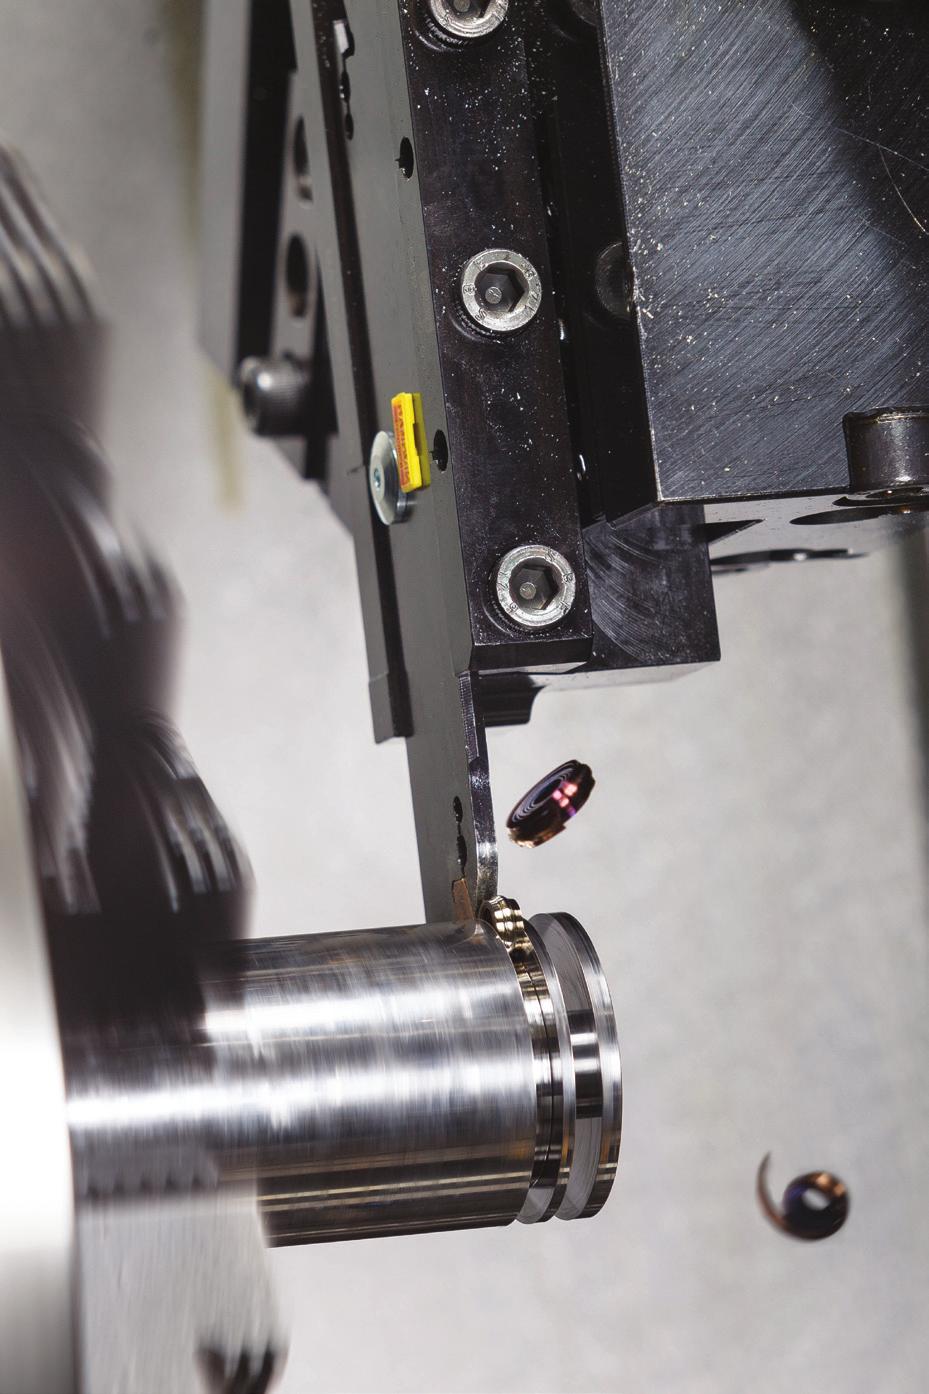 Solving machining challenges with CoroCut QD Solving the long overhang machining challenge One of the main factors in all parting and grooving operations is minimizing tool overhang wherever bars,